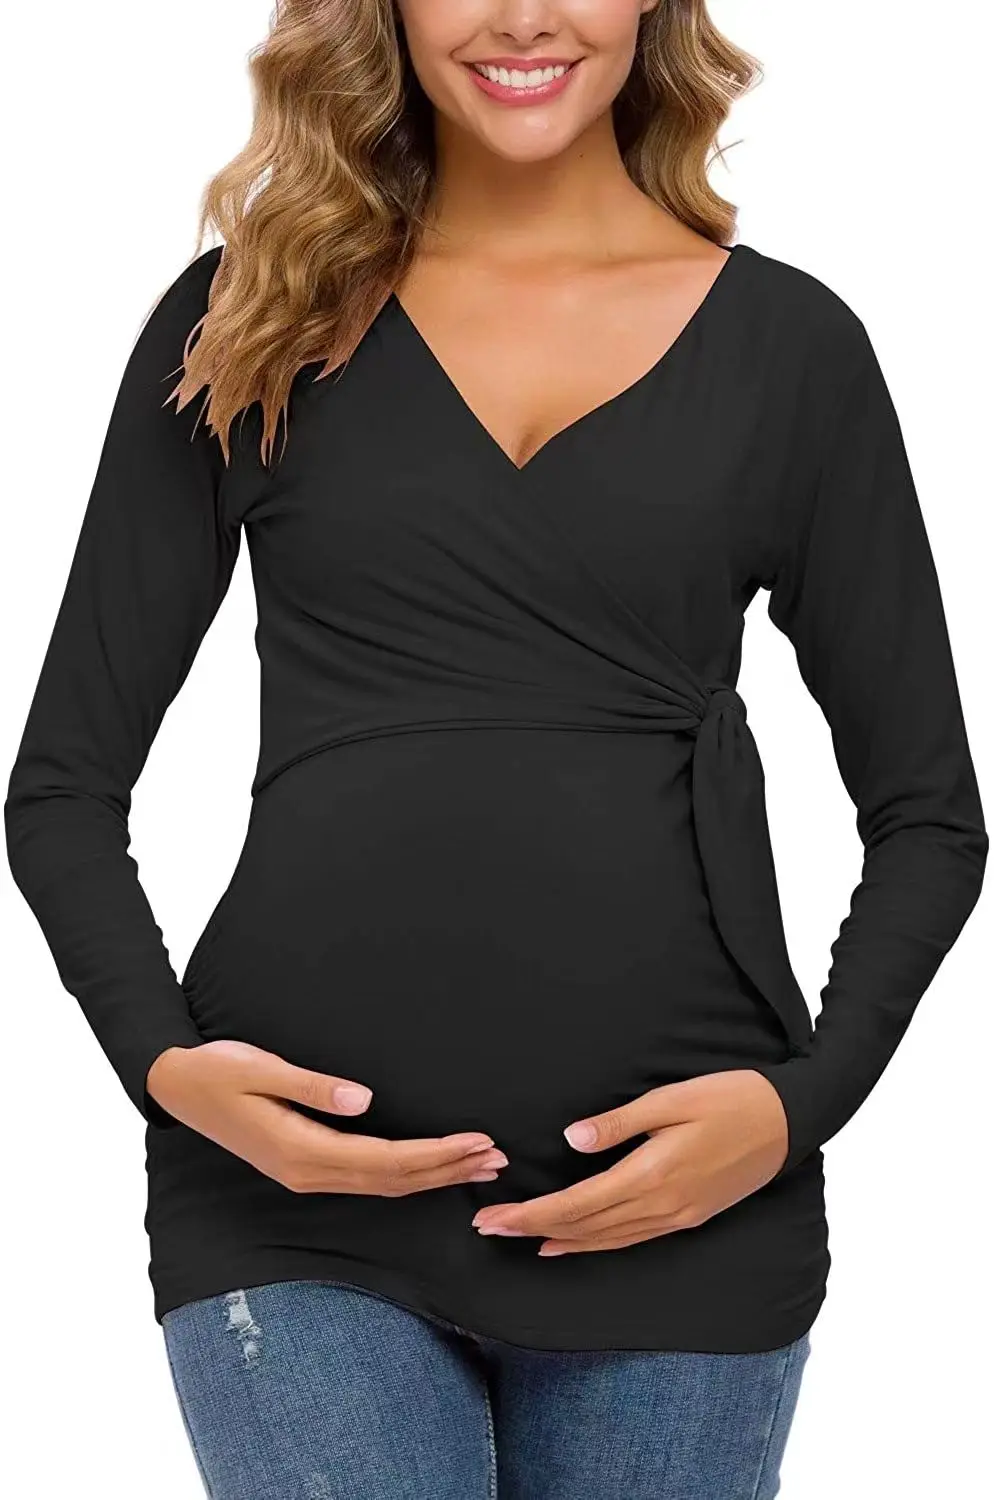 Maternity Shirt Long Sleeve Side Ruched Summer Tops Side Tie Bow Casual Pregnancy Clothes Breastfeeding V-Neck Sexy Tops enlarge